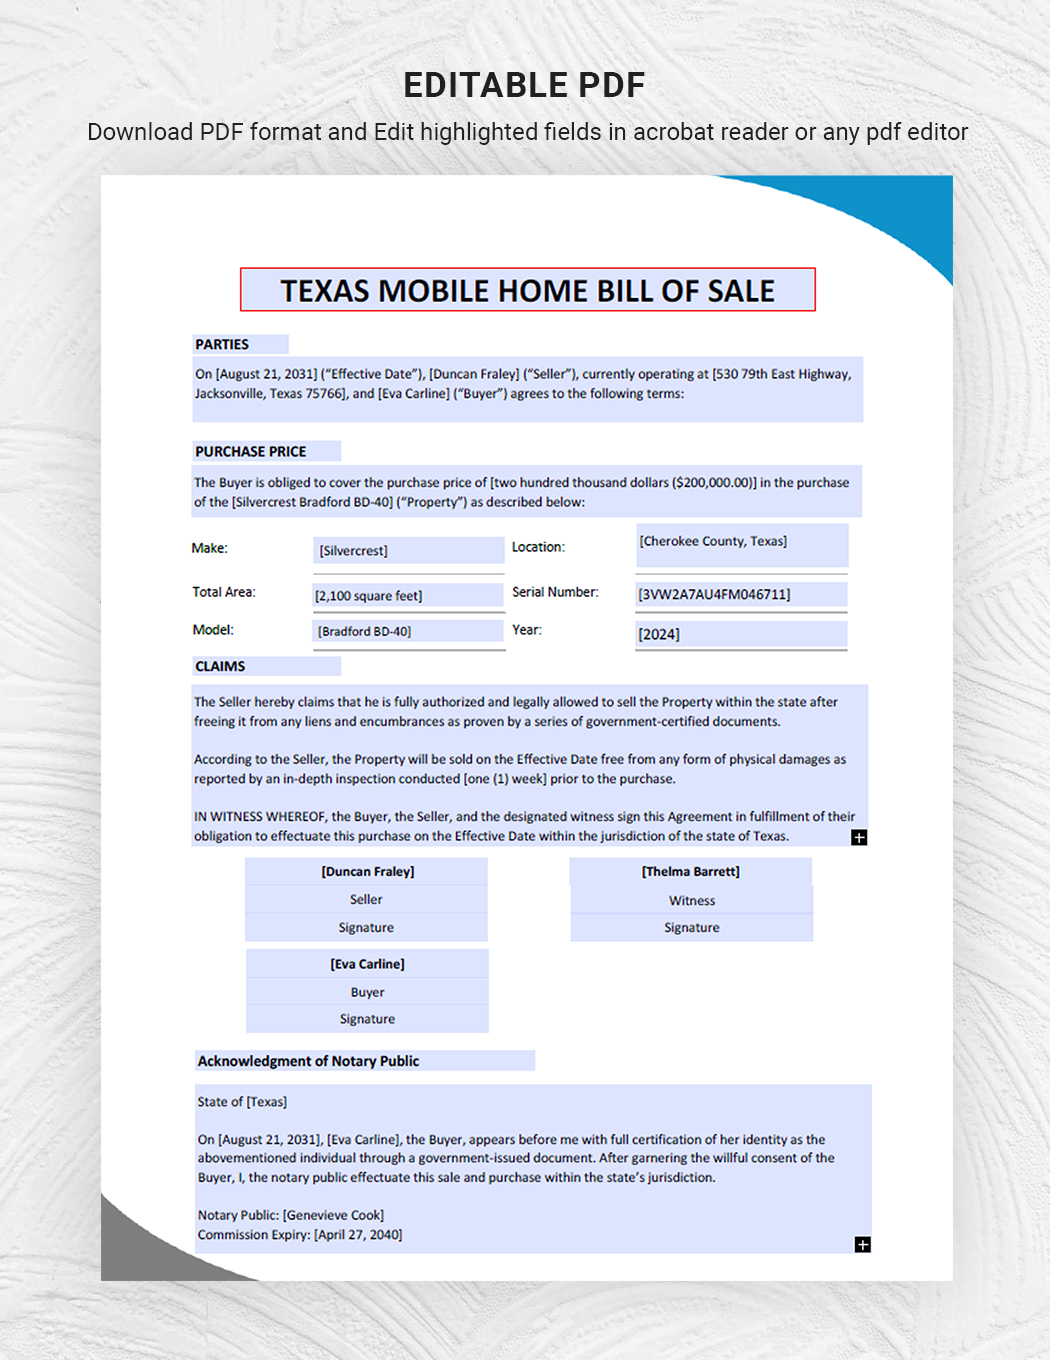 Texas Mobile Home Bill of Sale Template